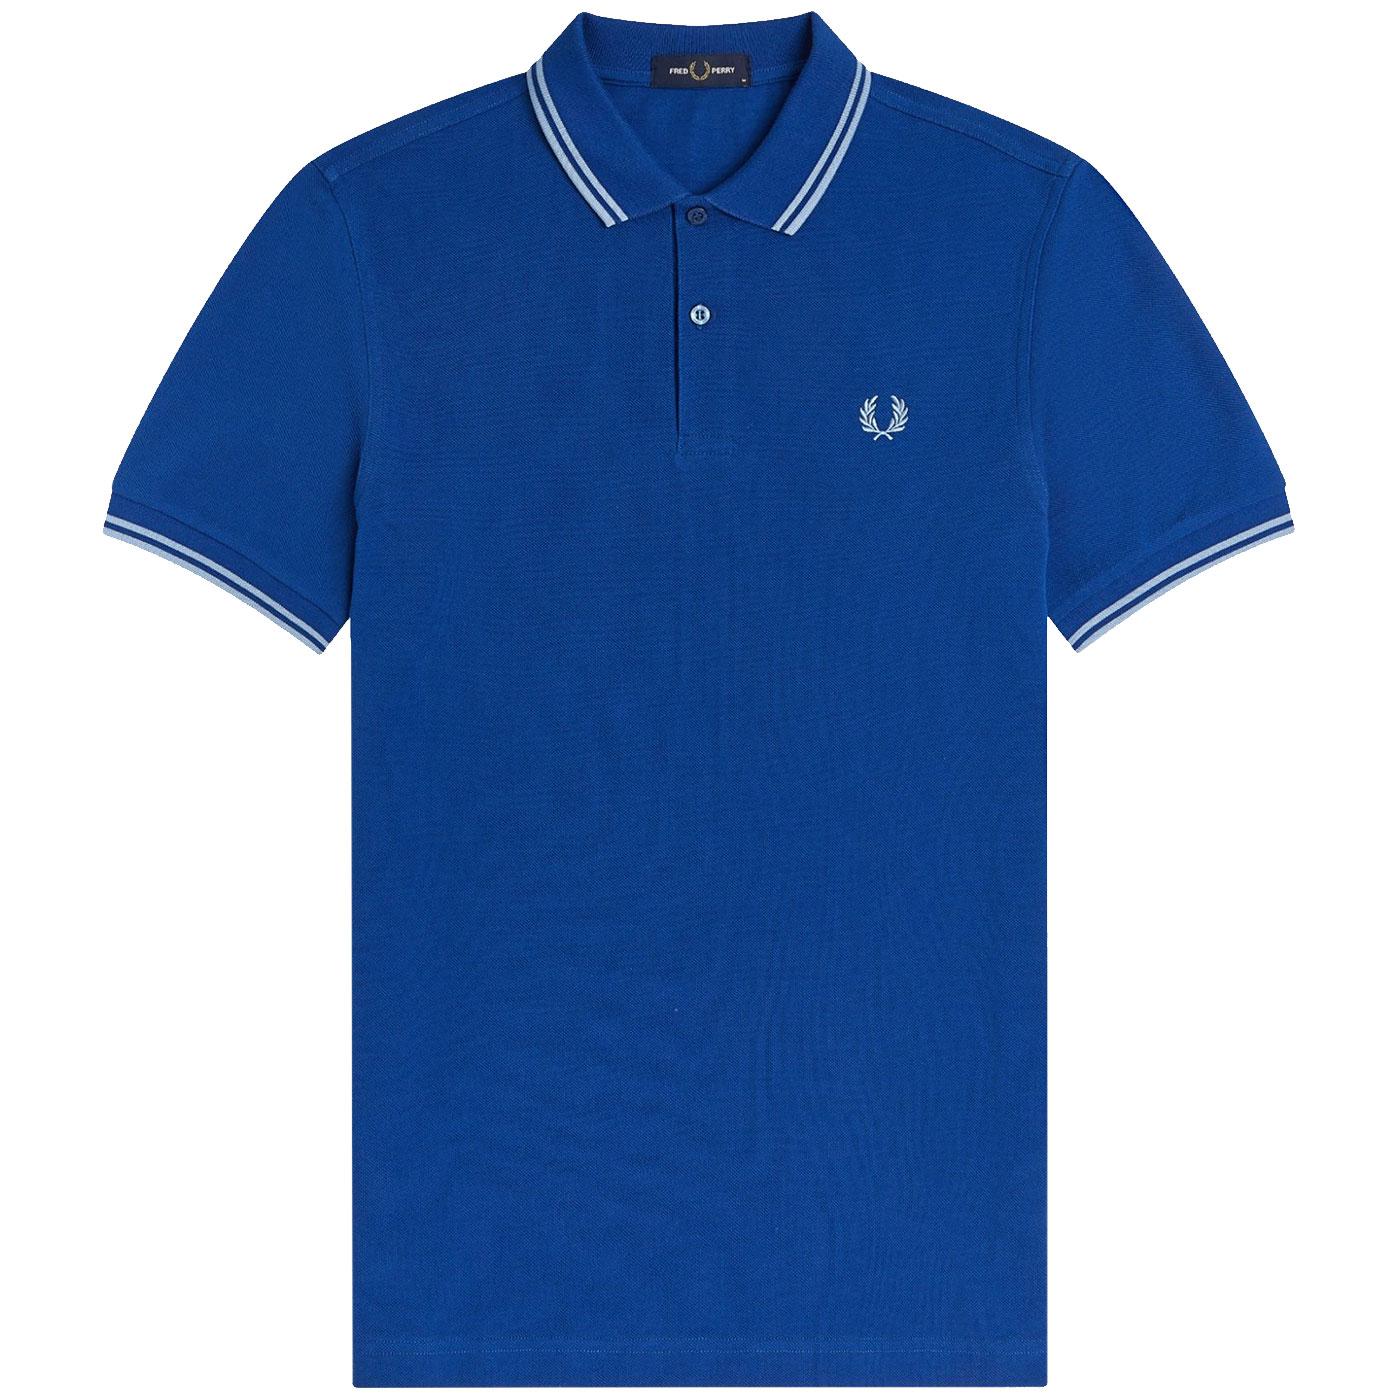 FRED PERRY M3600 Twin Tipped Mod Polo Shirt ROYAL